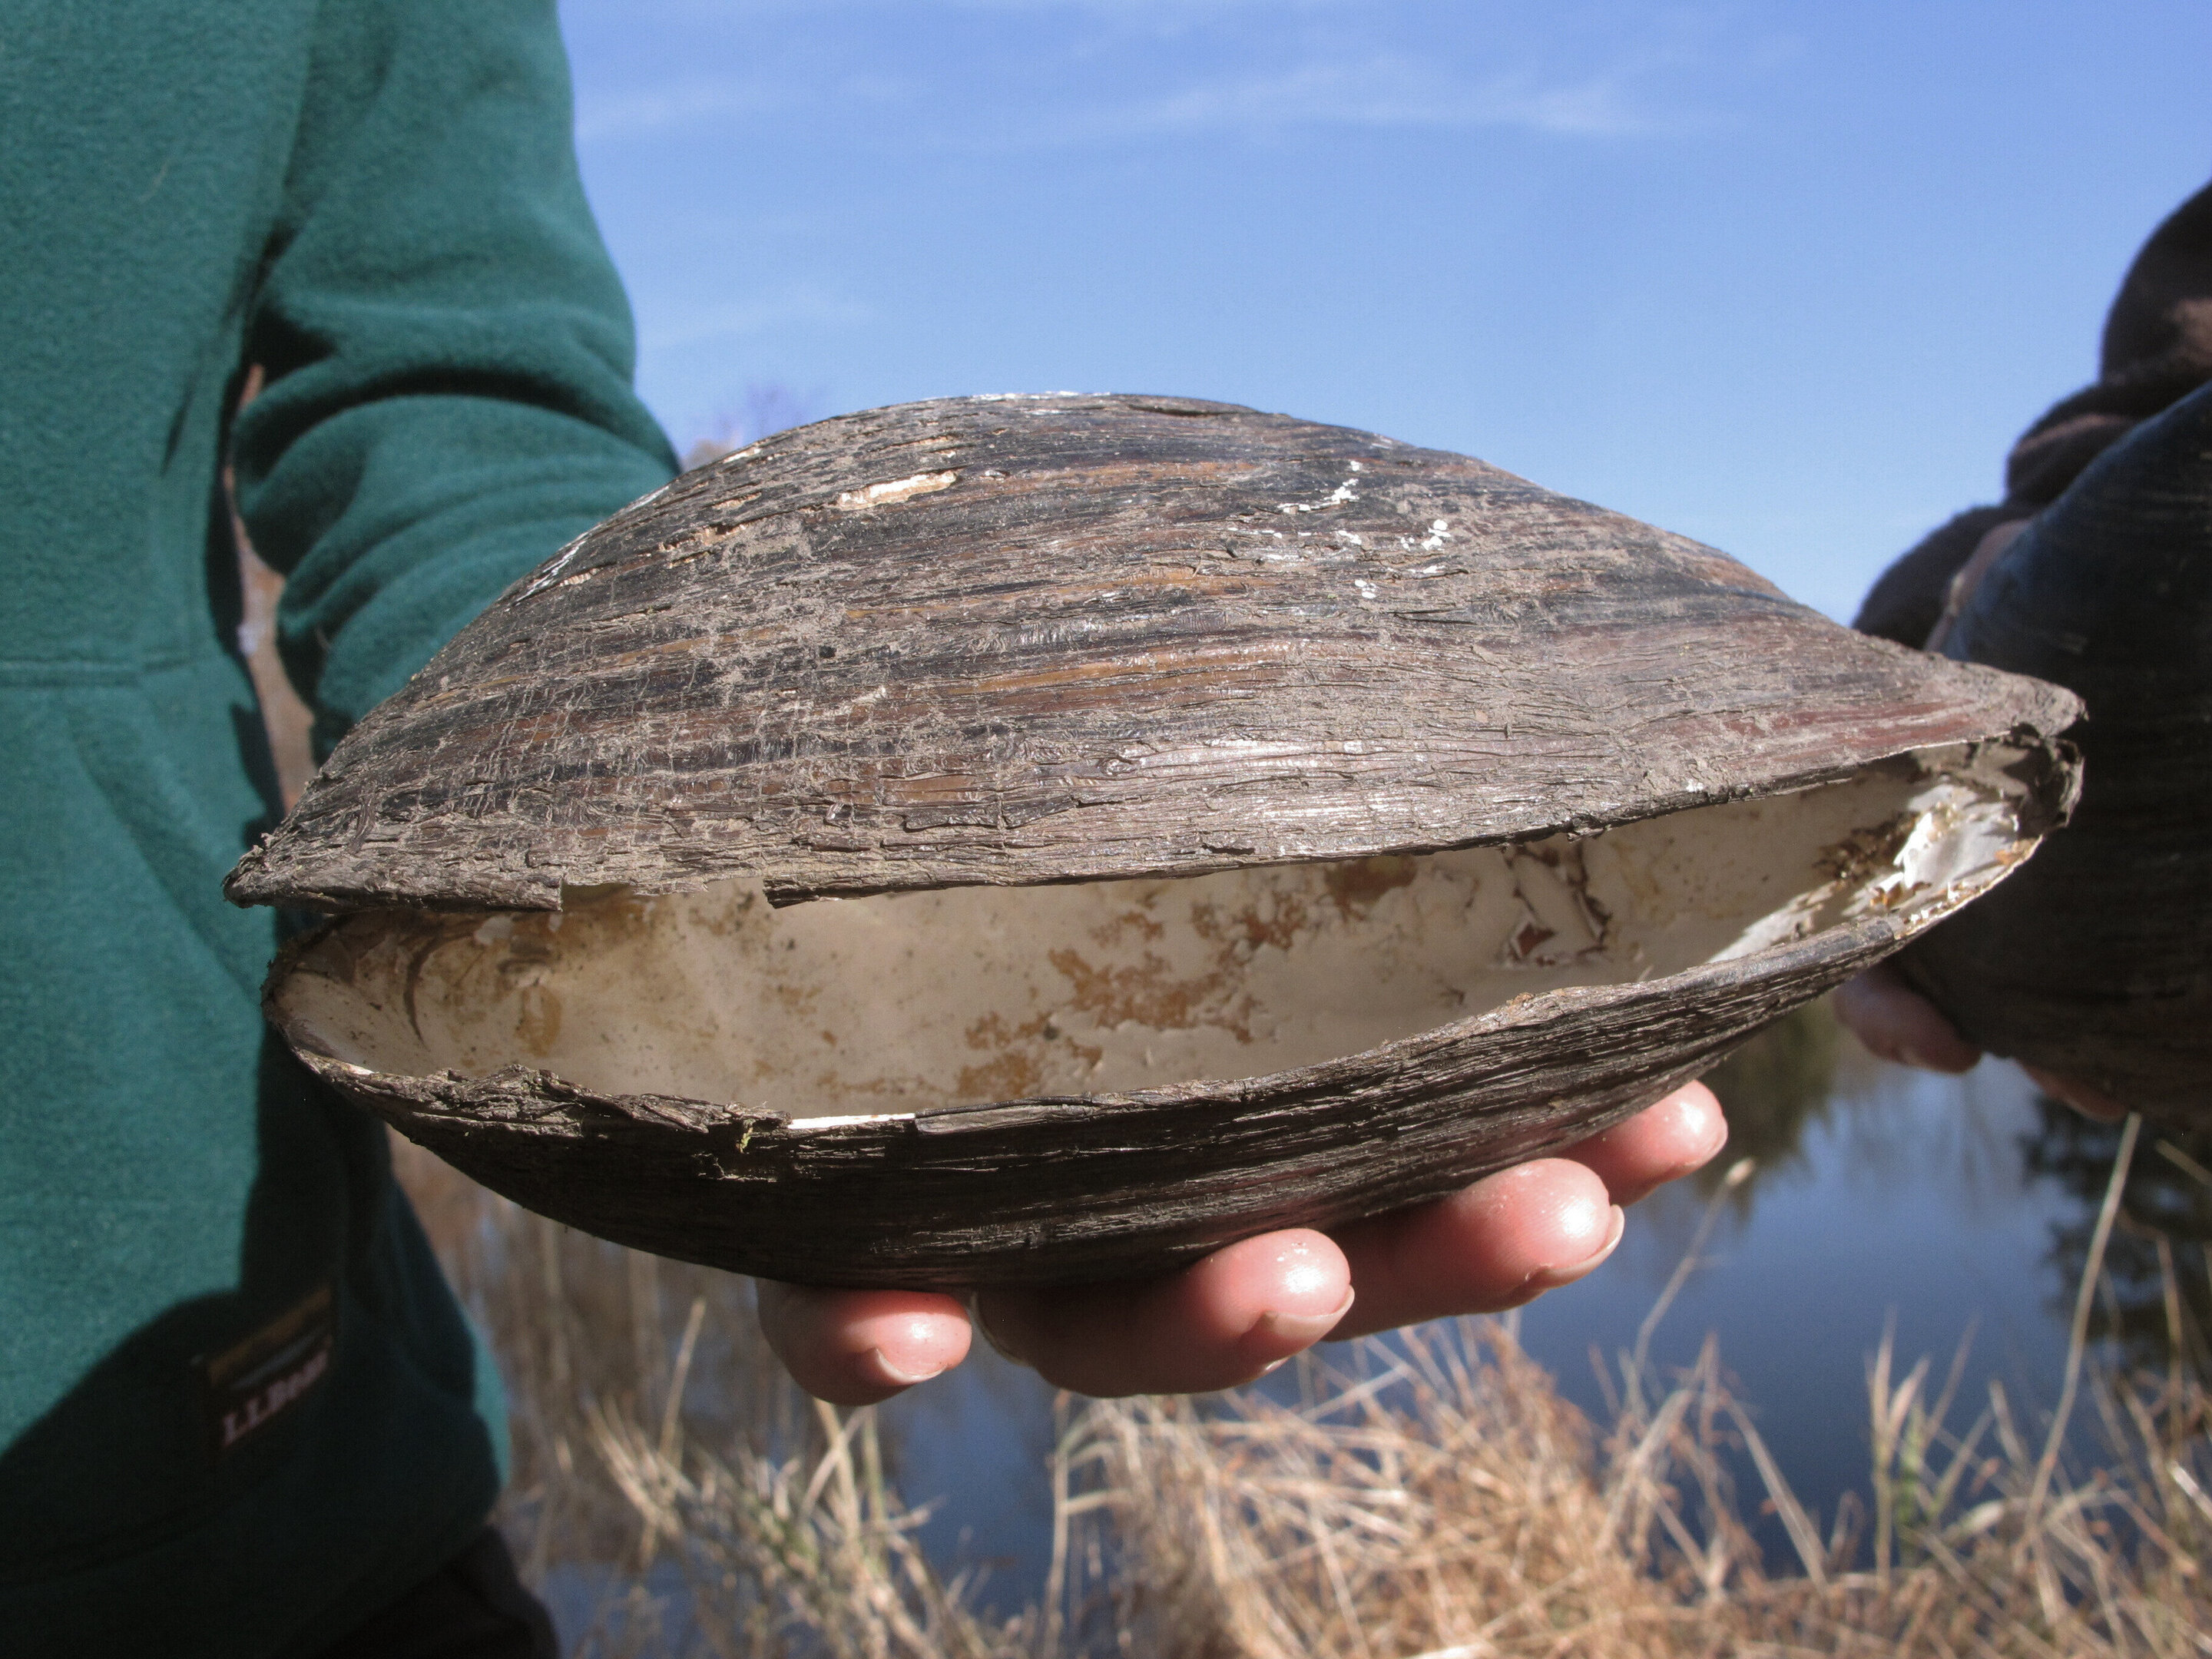 biggest clam shell ever found